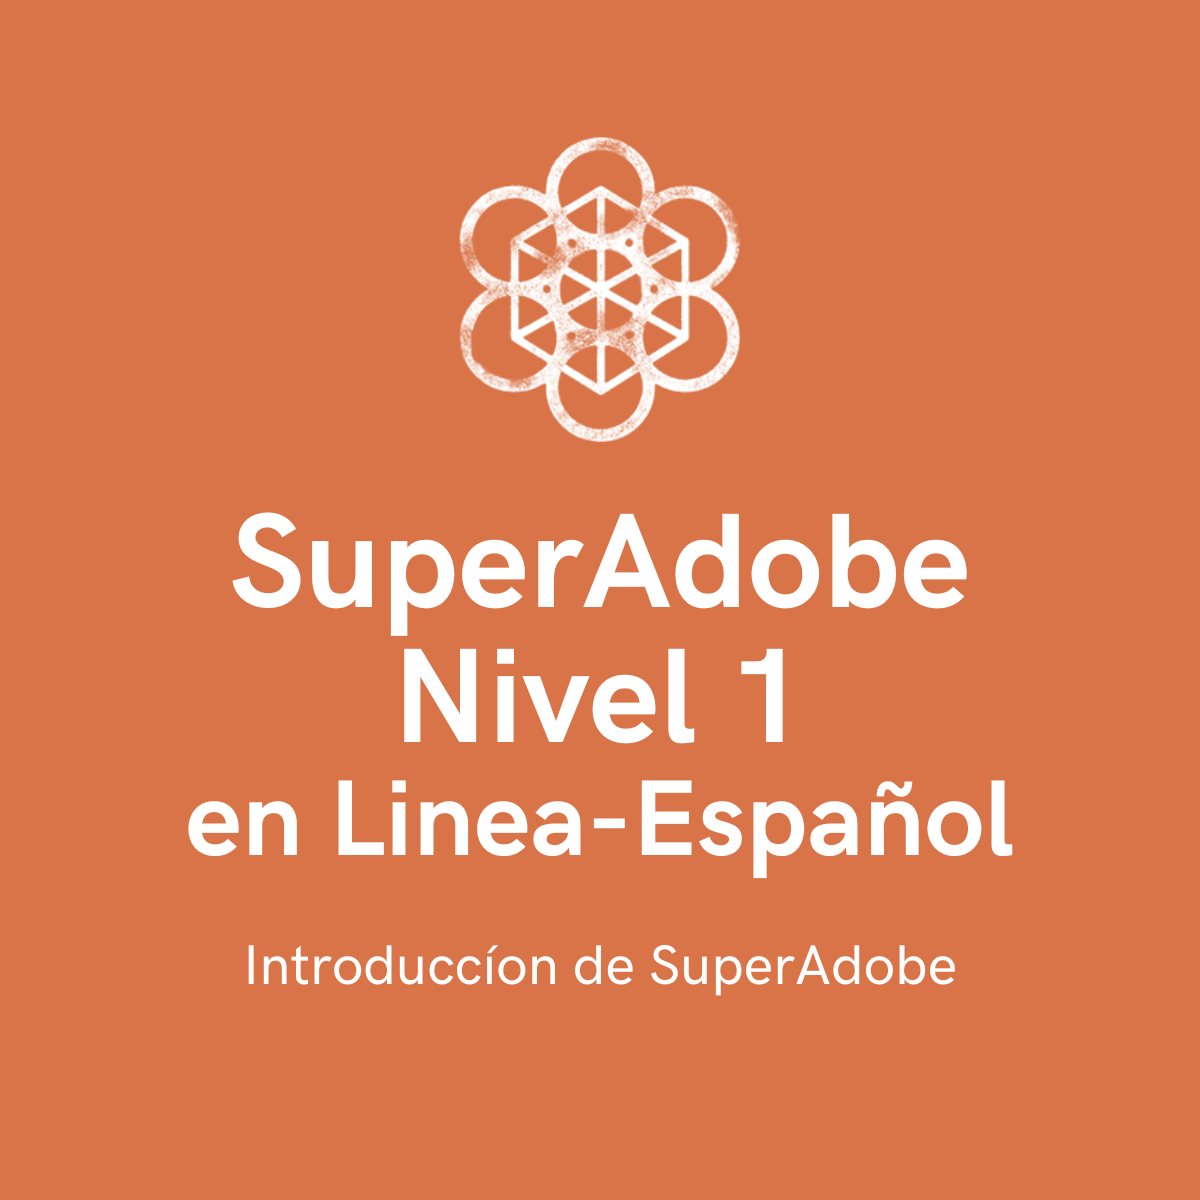 Major Announcement: New SuperAdobe Online Courses in English & Spanish